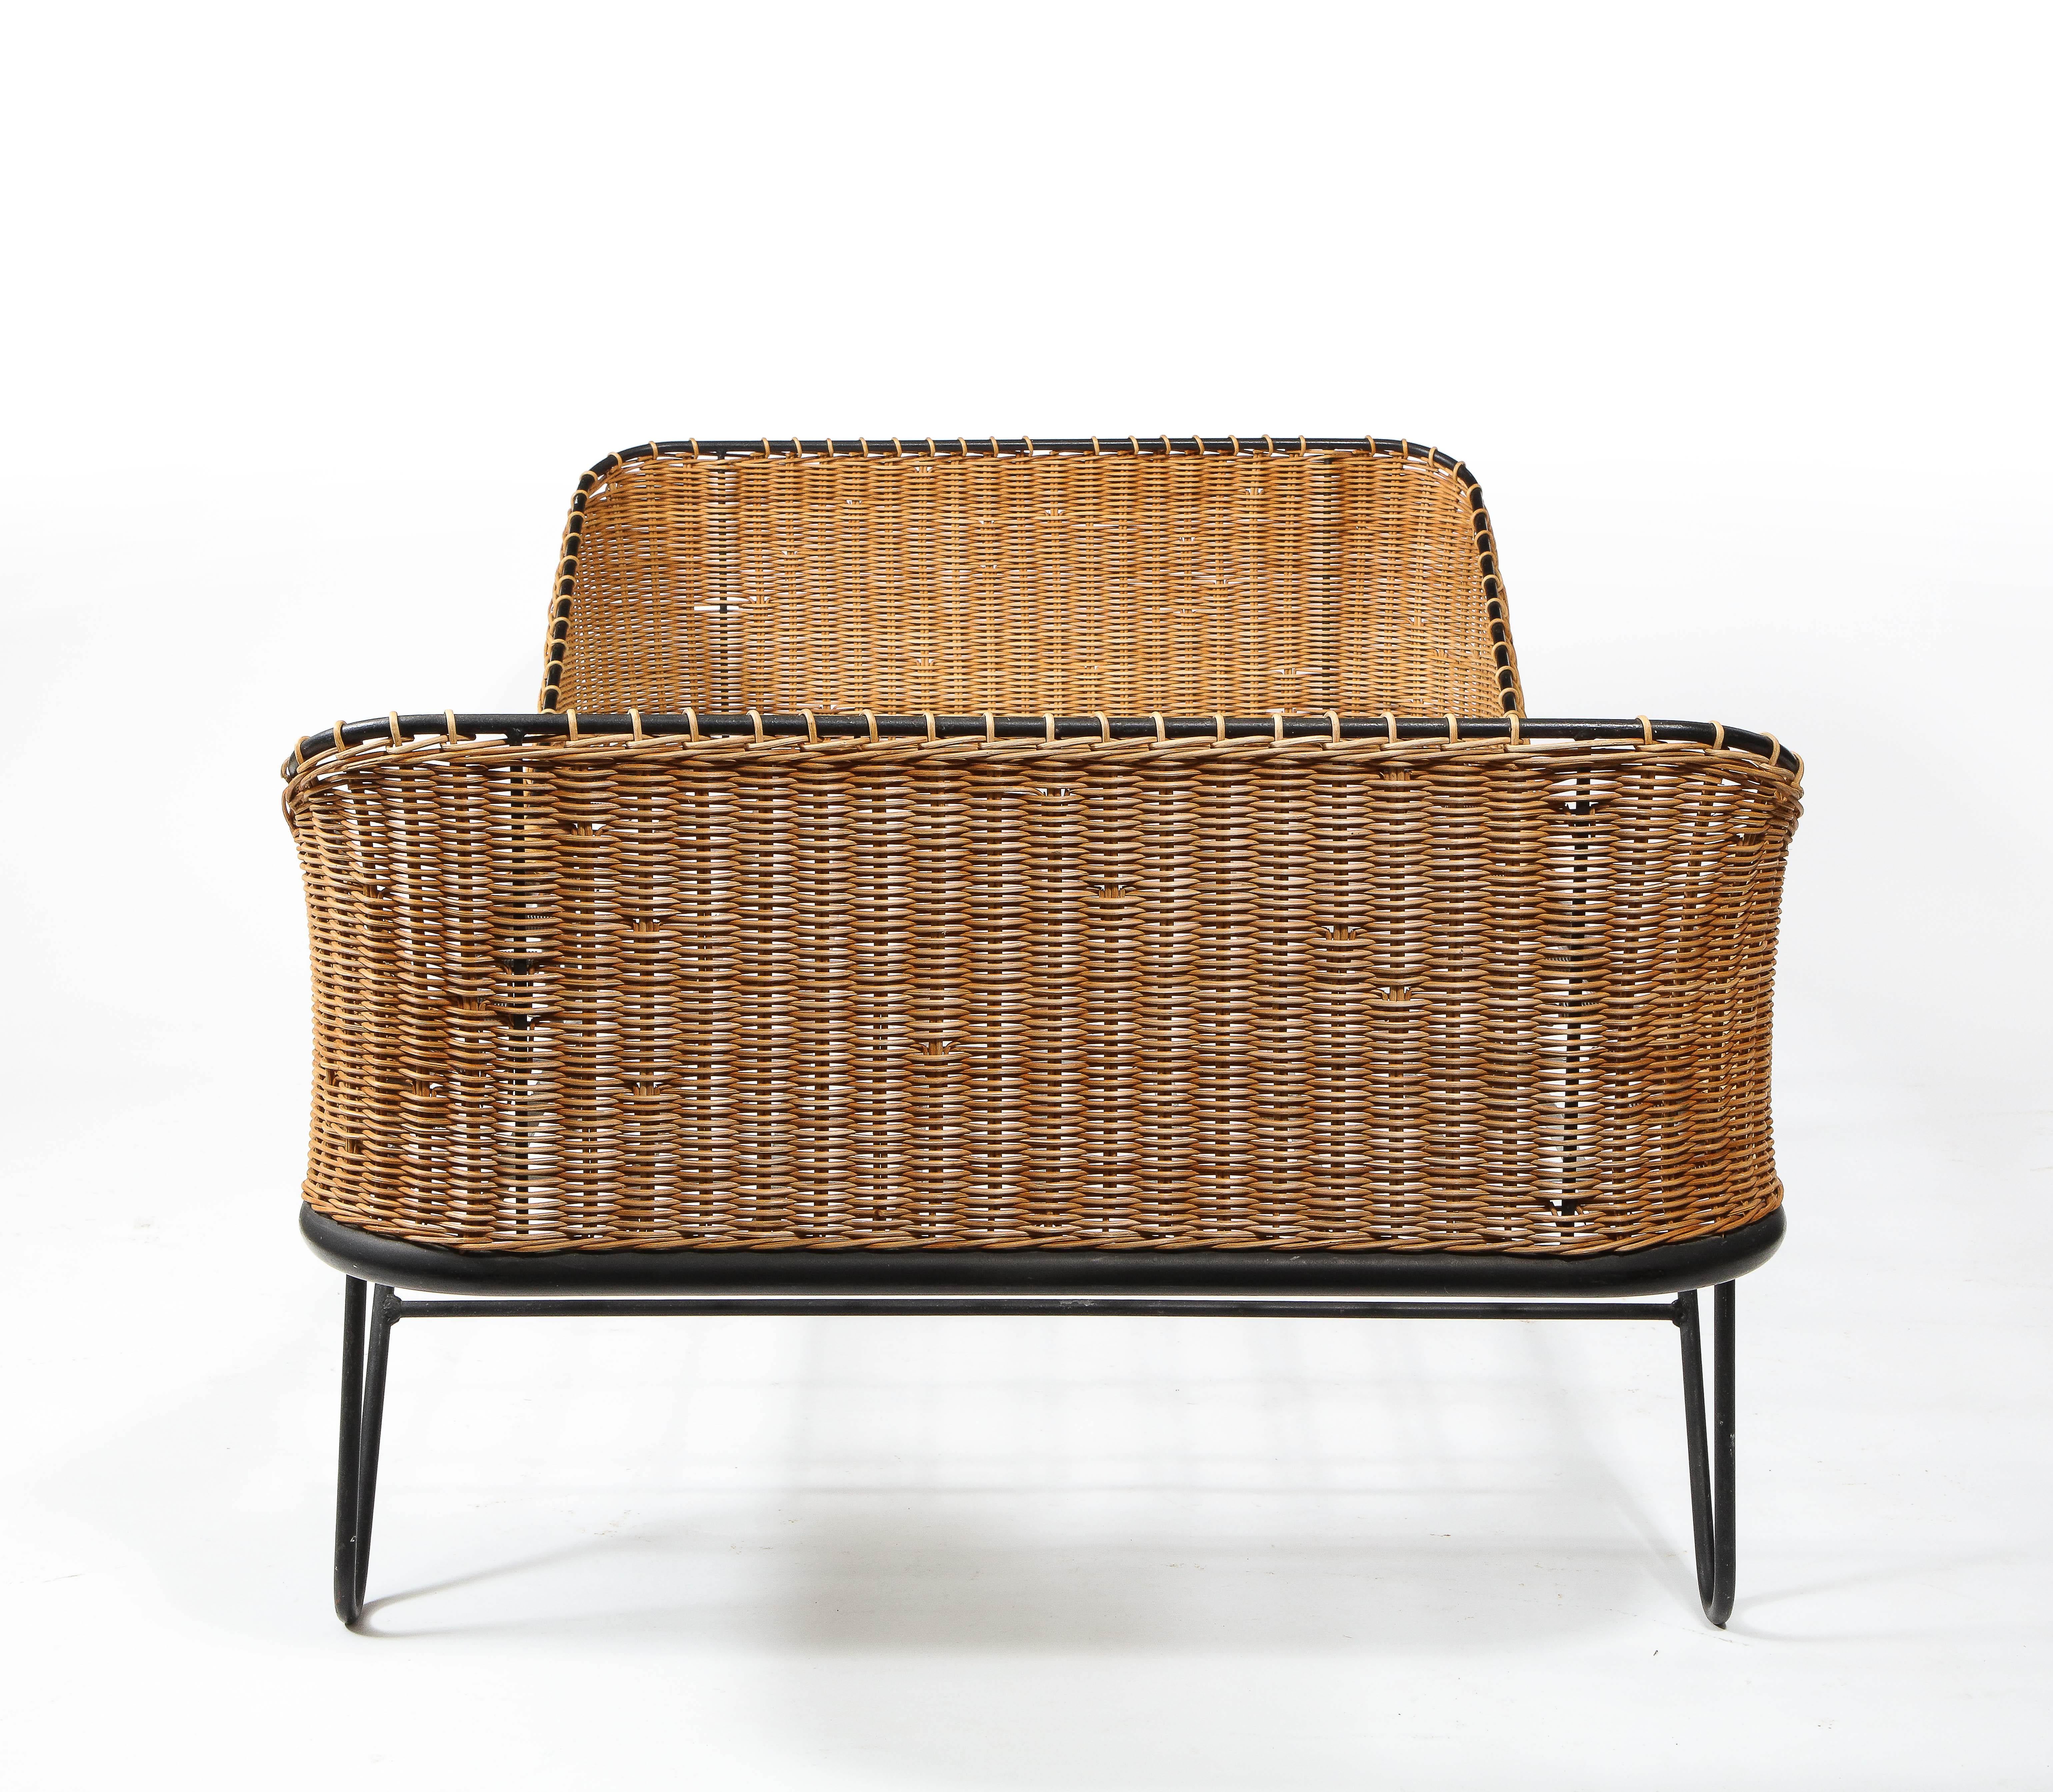 Raoul Guy Wrought Iron & Wicker Daybed, France 1960's For Sale 7